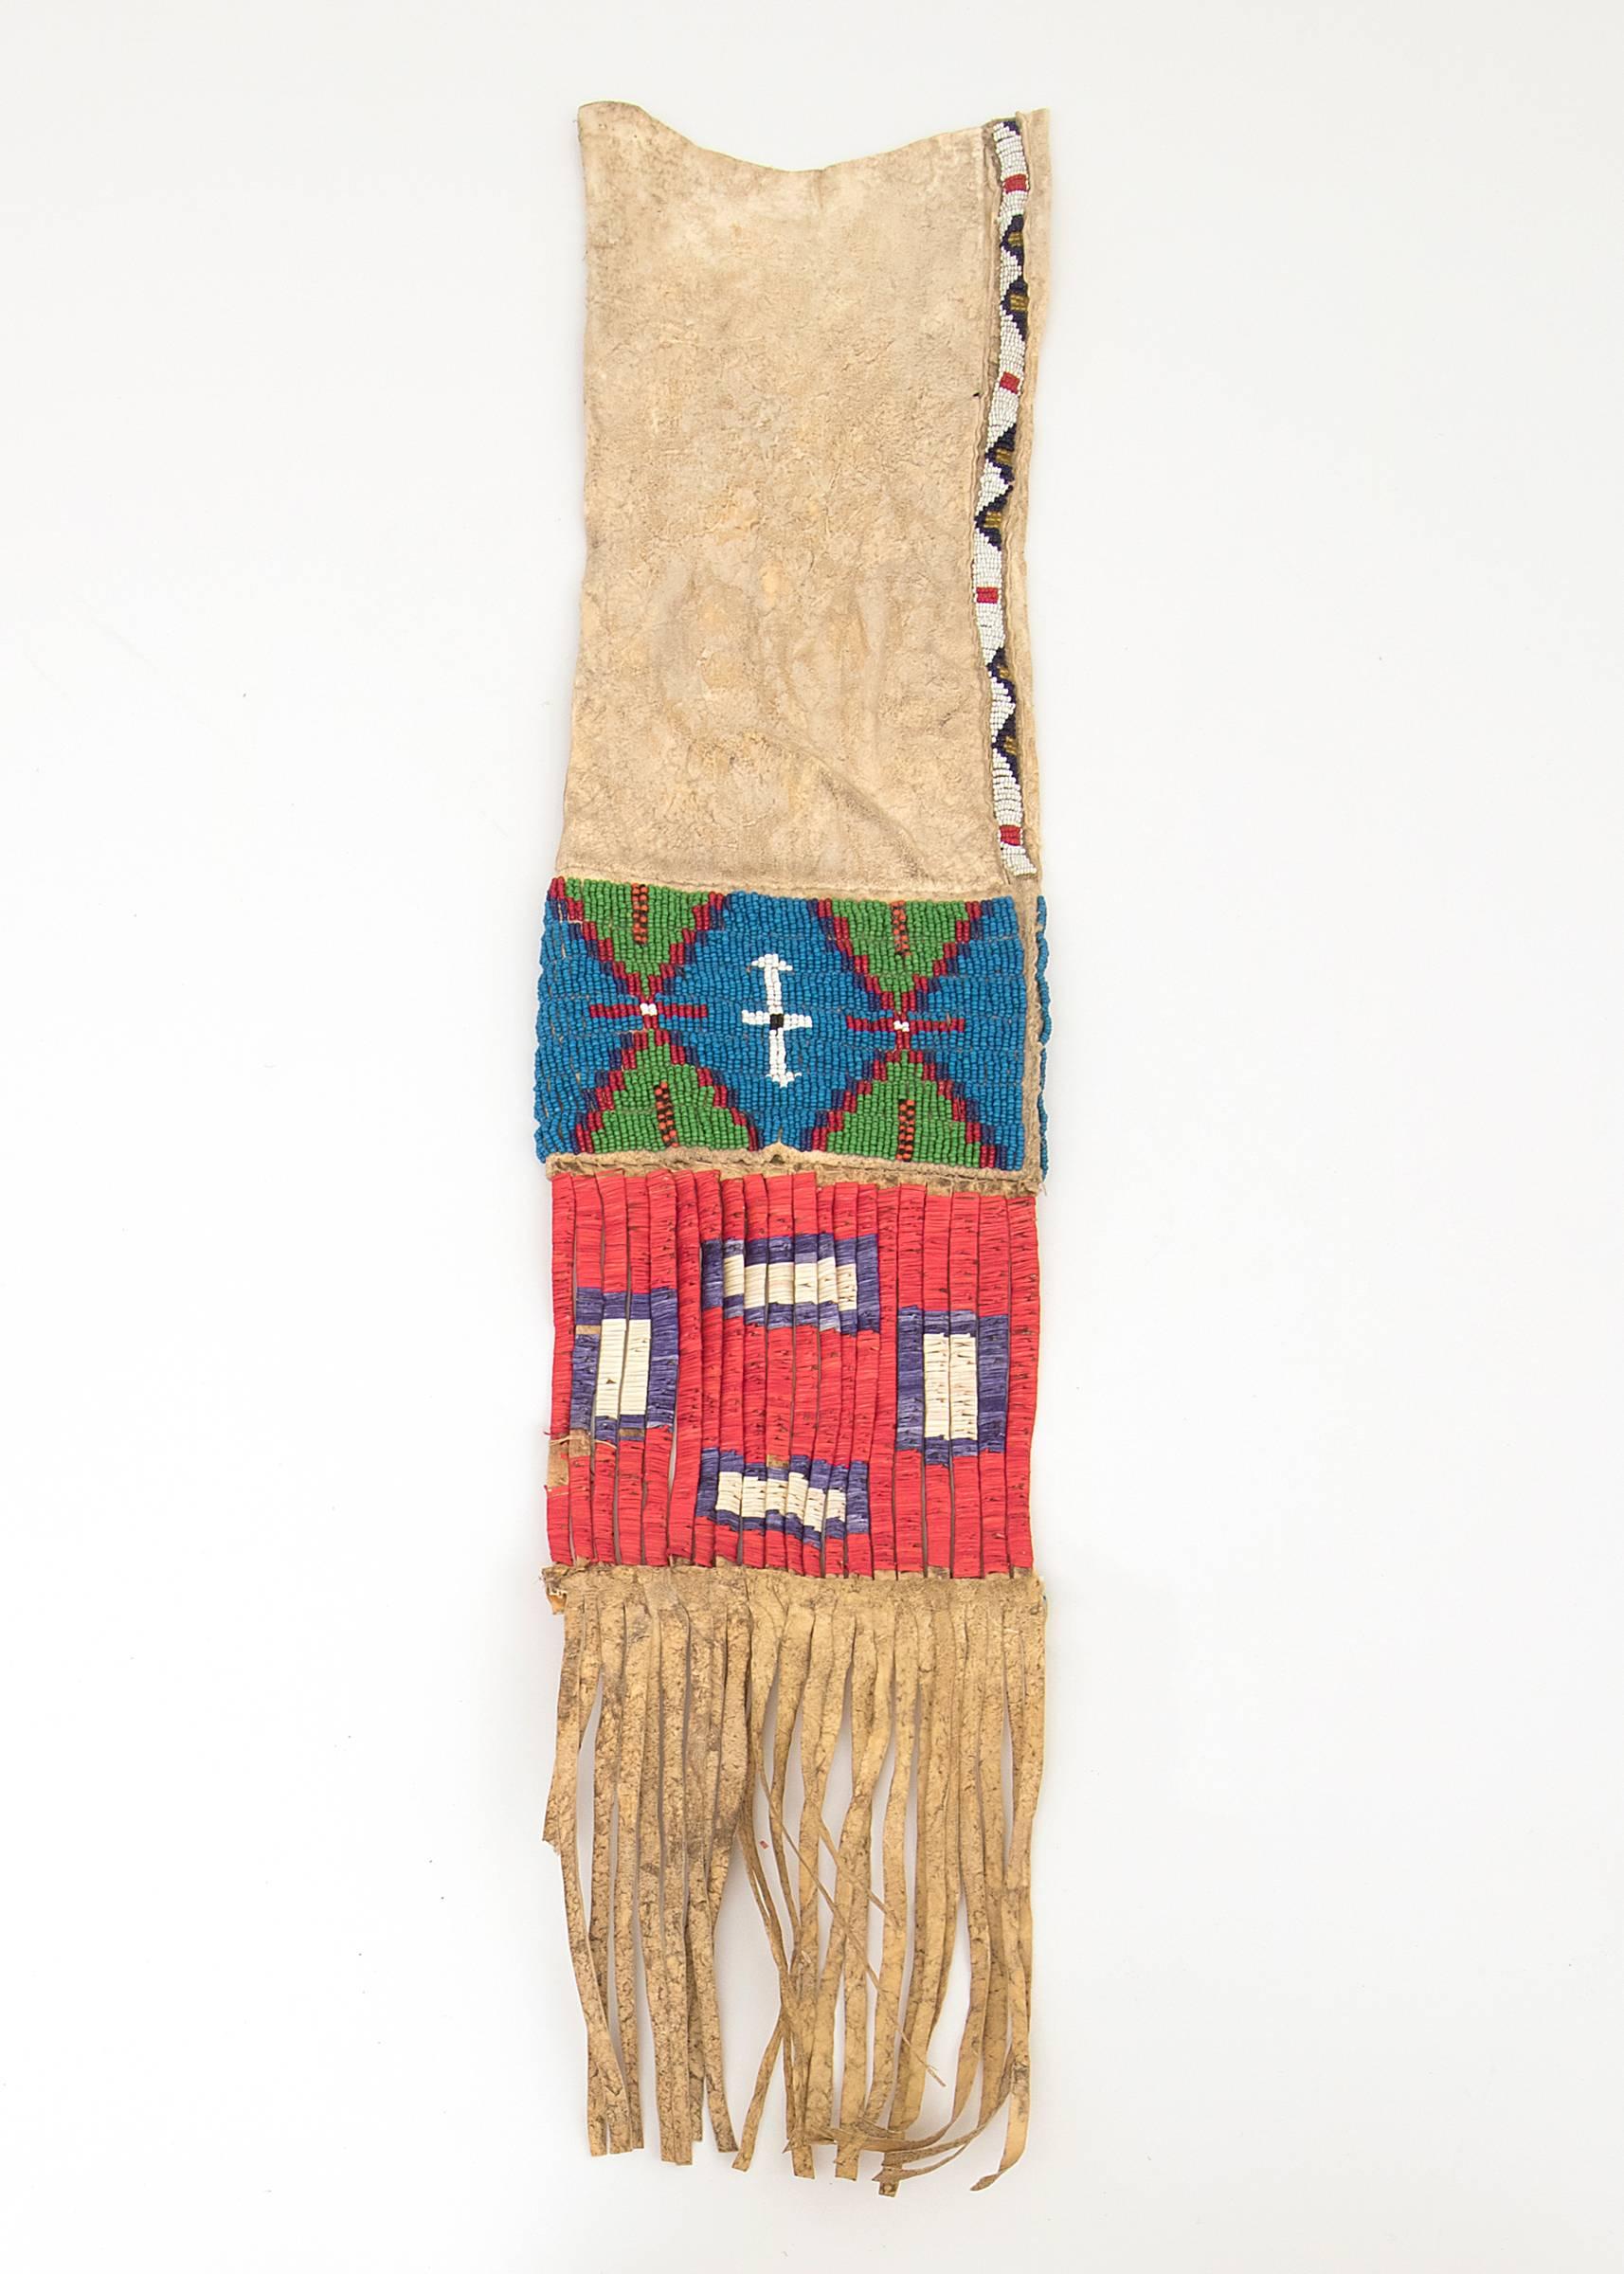 A pipe bag (Tobacco Bag), constructed of native tanned hide and and beaded with stylized tepee motifs in red, blue, orange, green, black and white trade beads. The opposite side has a beaded panel with geometric devices in similar colors. The fringe